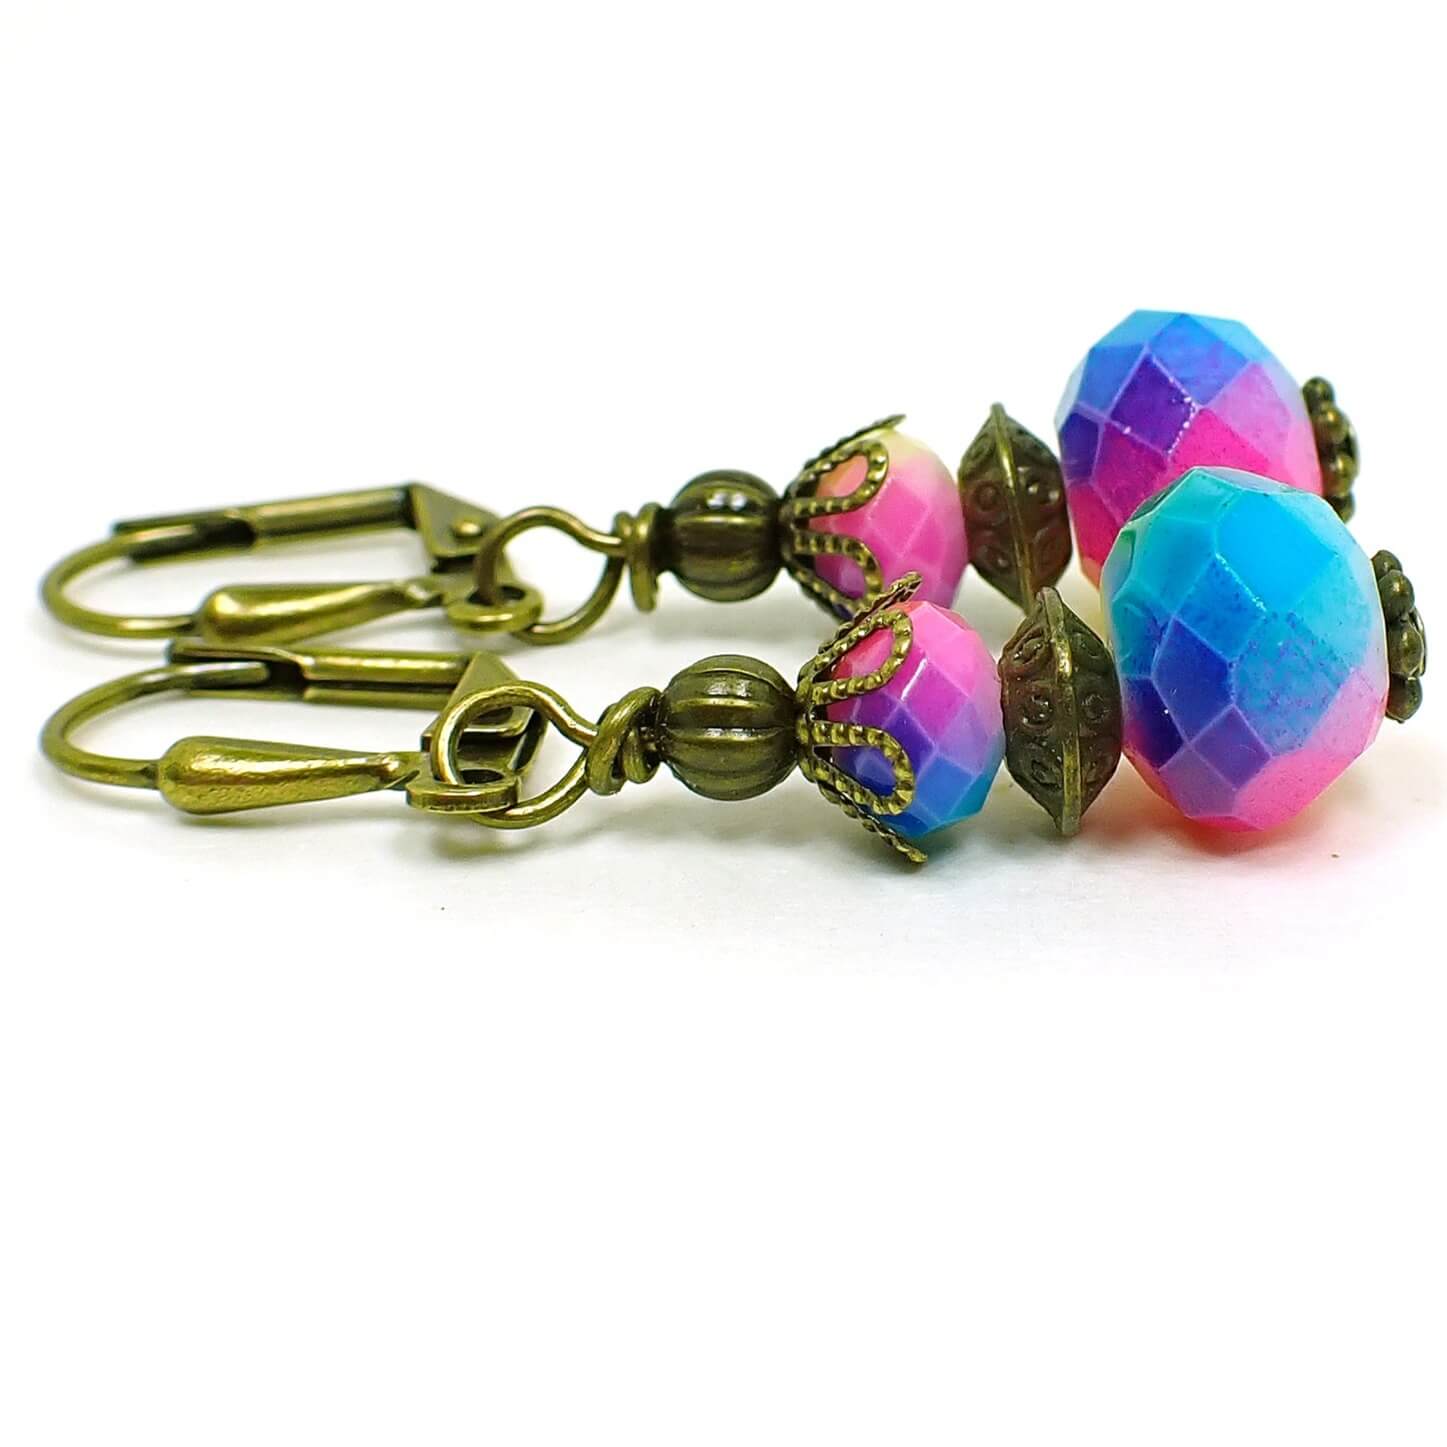 Side view of the rainbow earrings. The metal is antiqued brass in color. There are faceted glass rondelle beads at the top and larger ones at the bottom. They have different vibrant colors of the rainbow blended all the way around the beads.